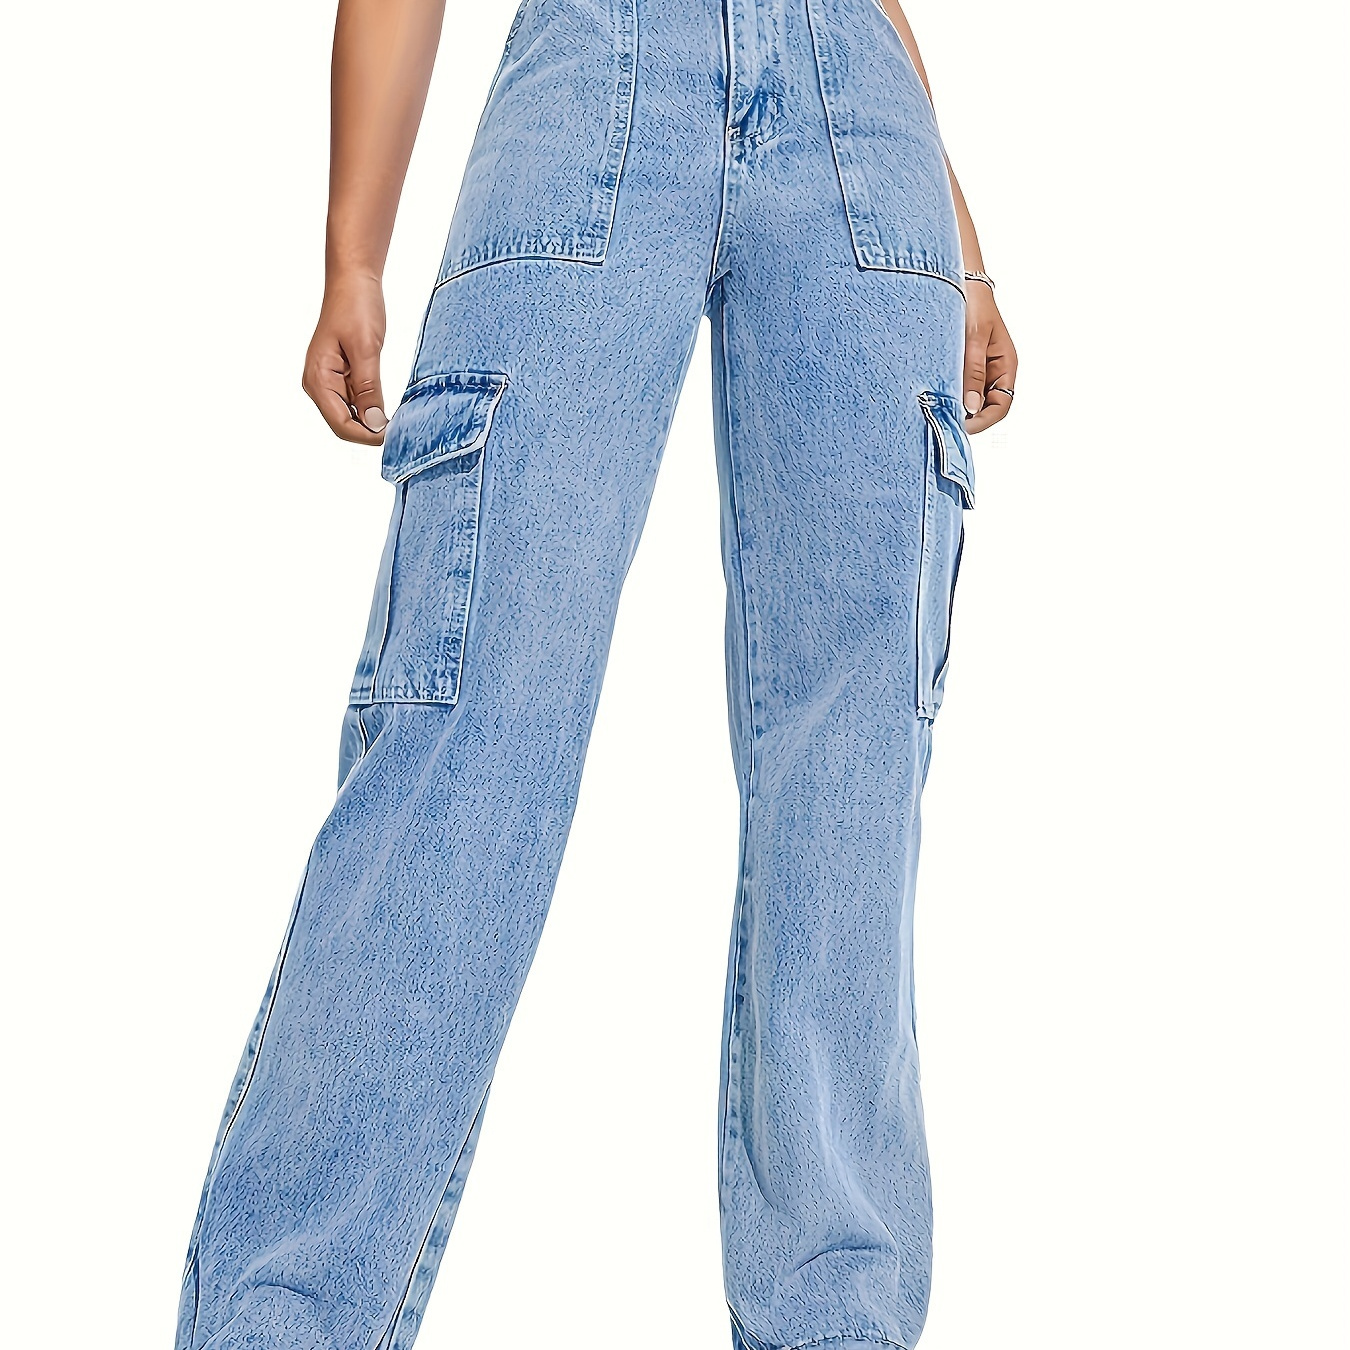 

Women's Plus Size Elastic Waist Denim Jeans, Fashion Basic Style, Casual High-waisted Wide Leg Pants With Flap Pockets